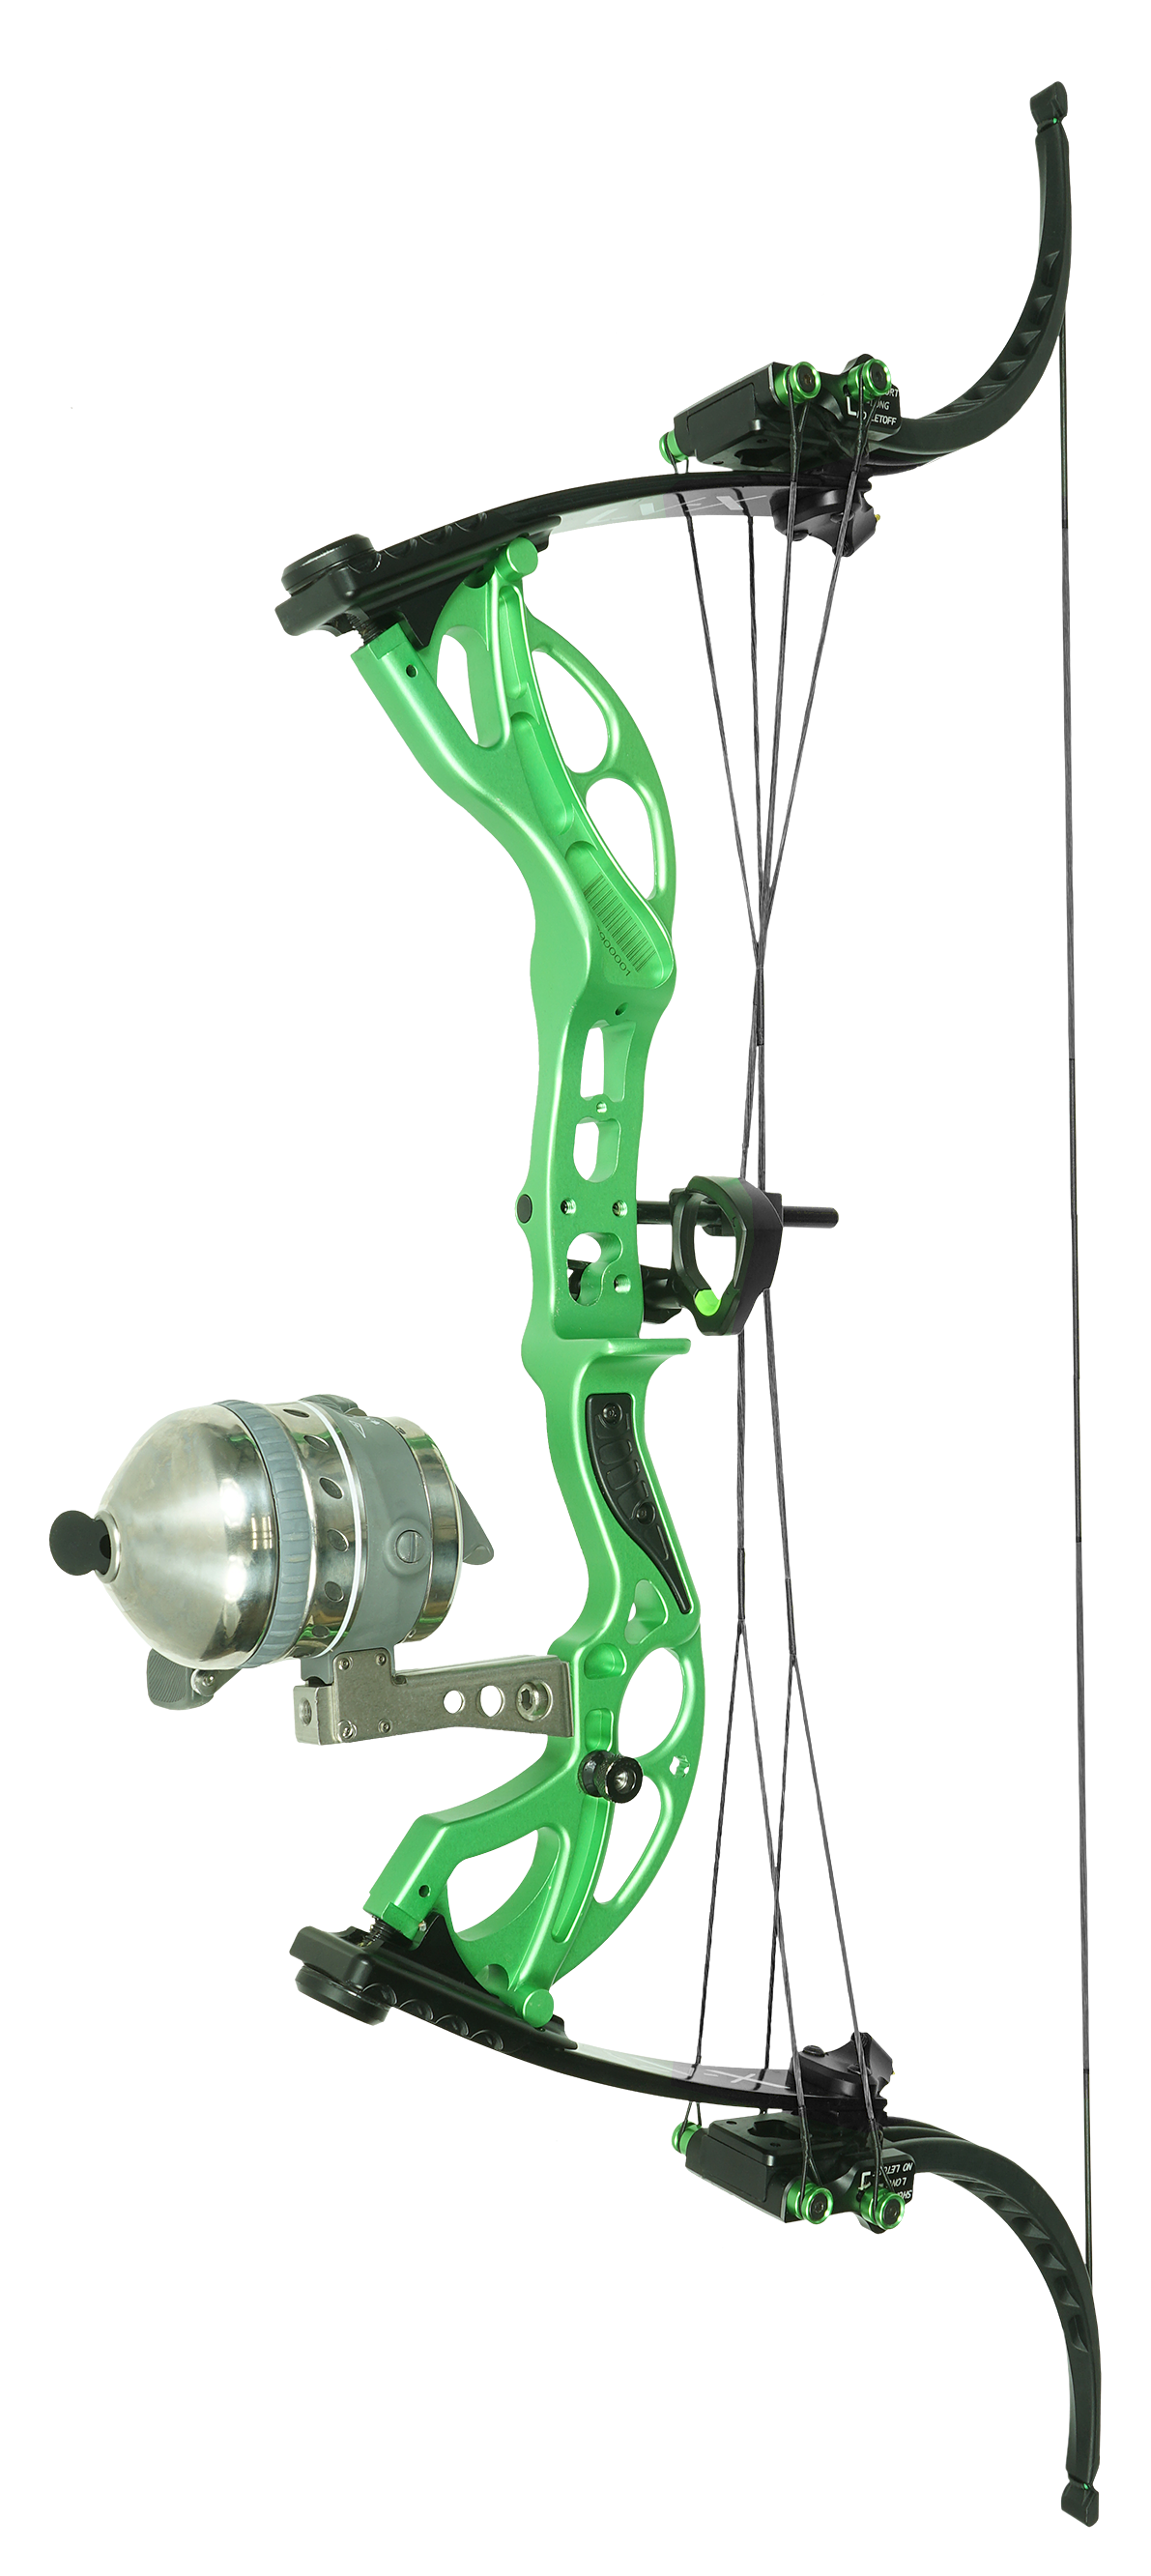 New Muzzy/Oneida Bow BowFishing Country, 56% OFF